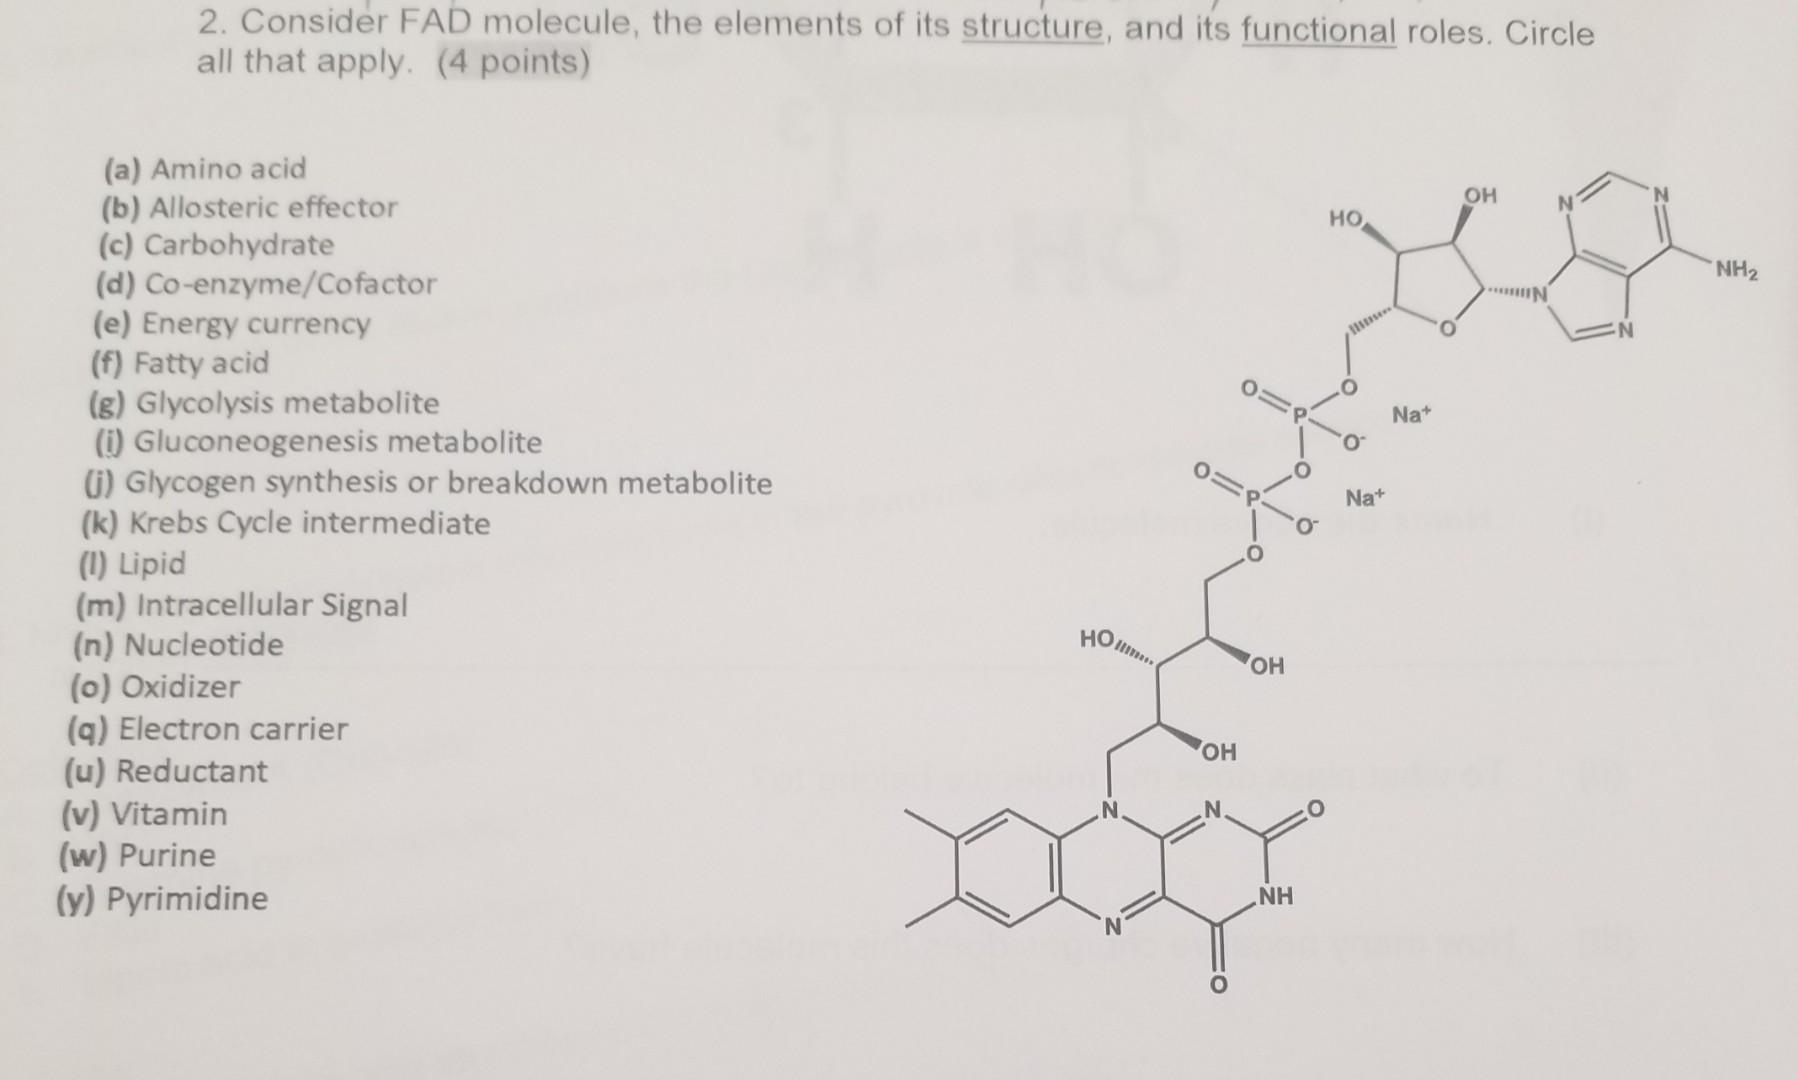 2. Consider FAD molecule, the elements of its structure, and its functional roles. Circle all that apply (4 points) OH HO , N